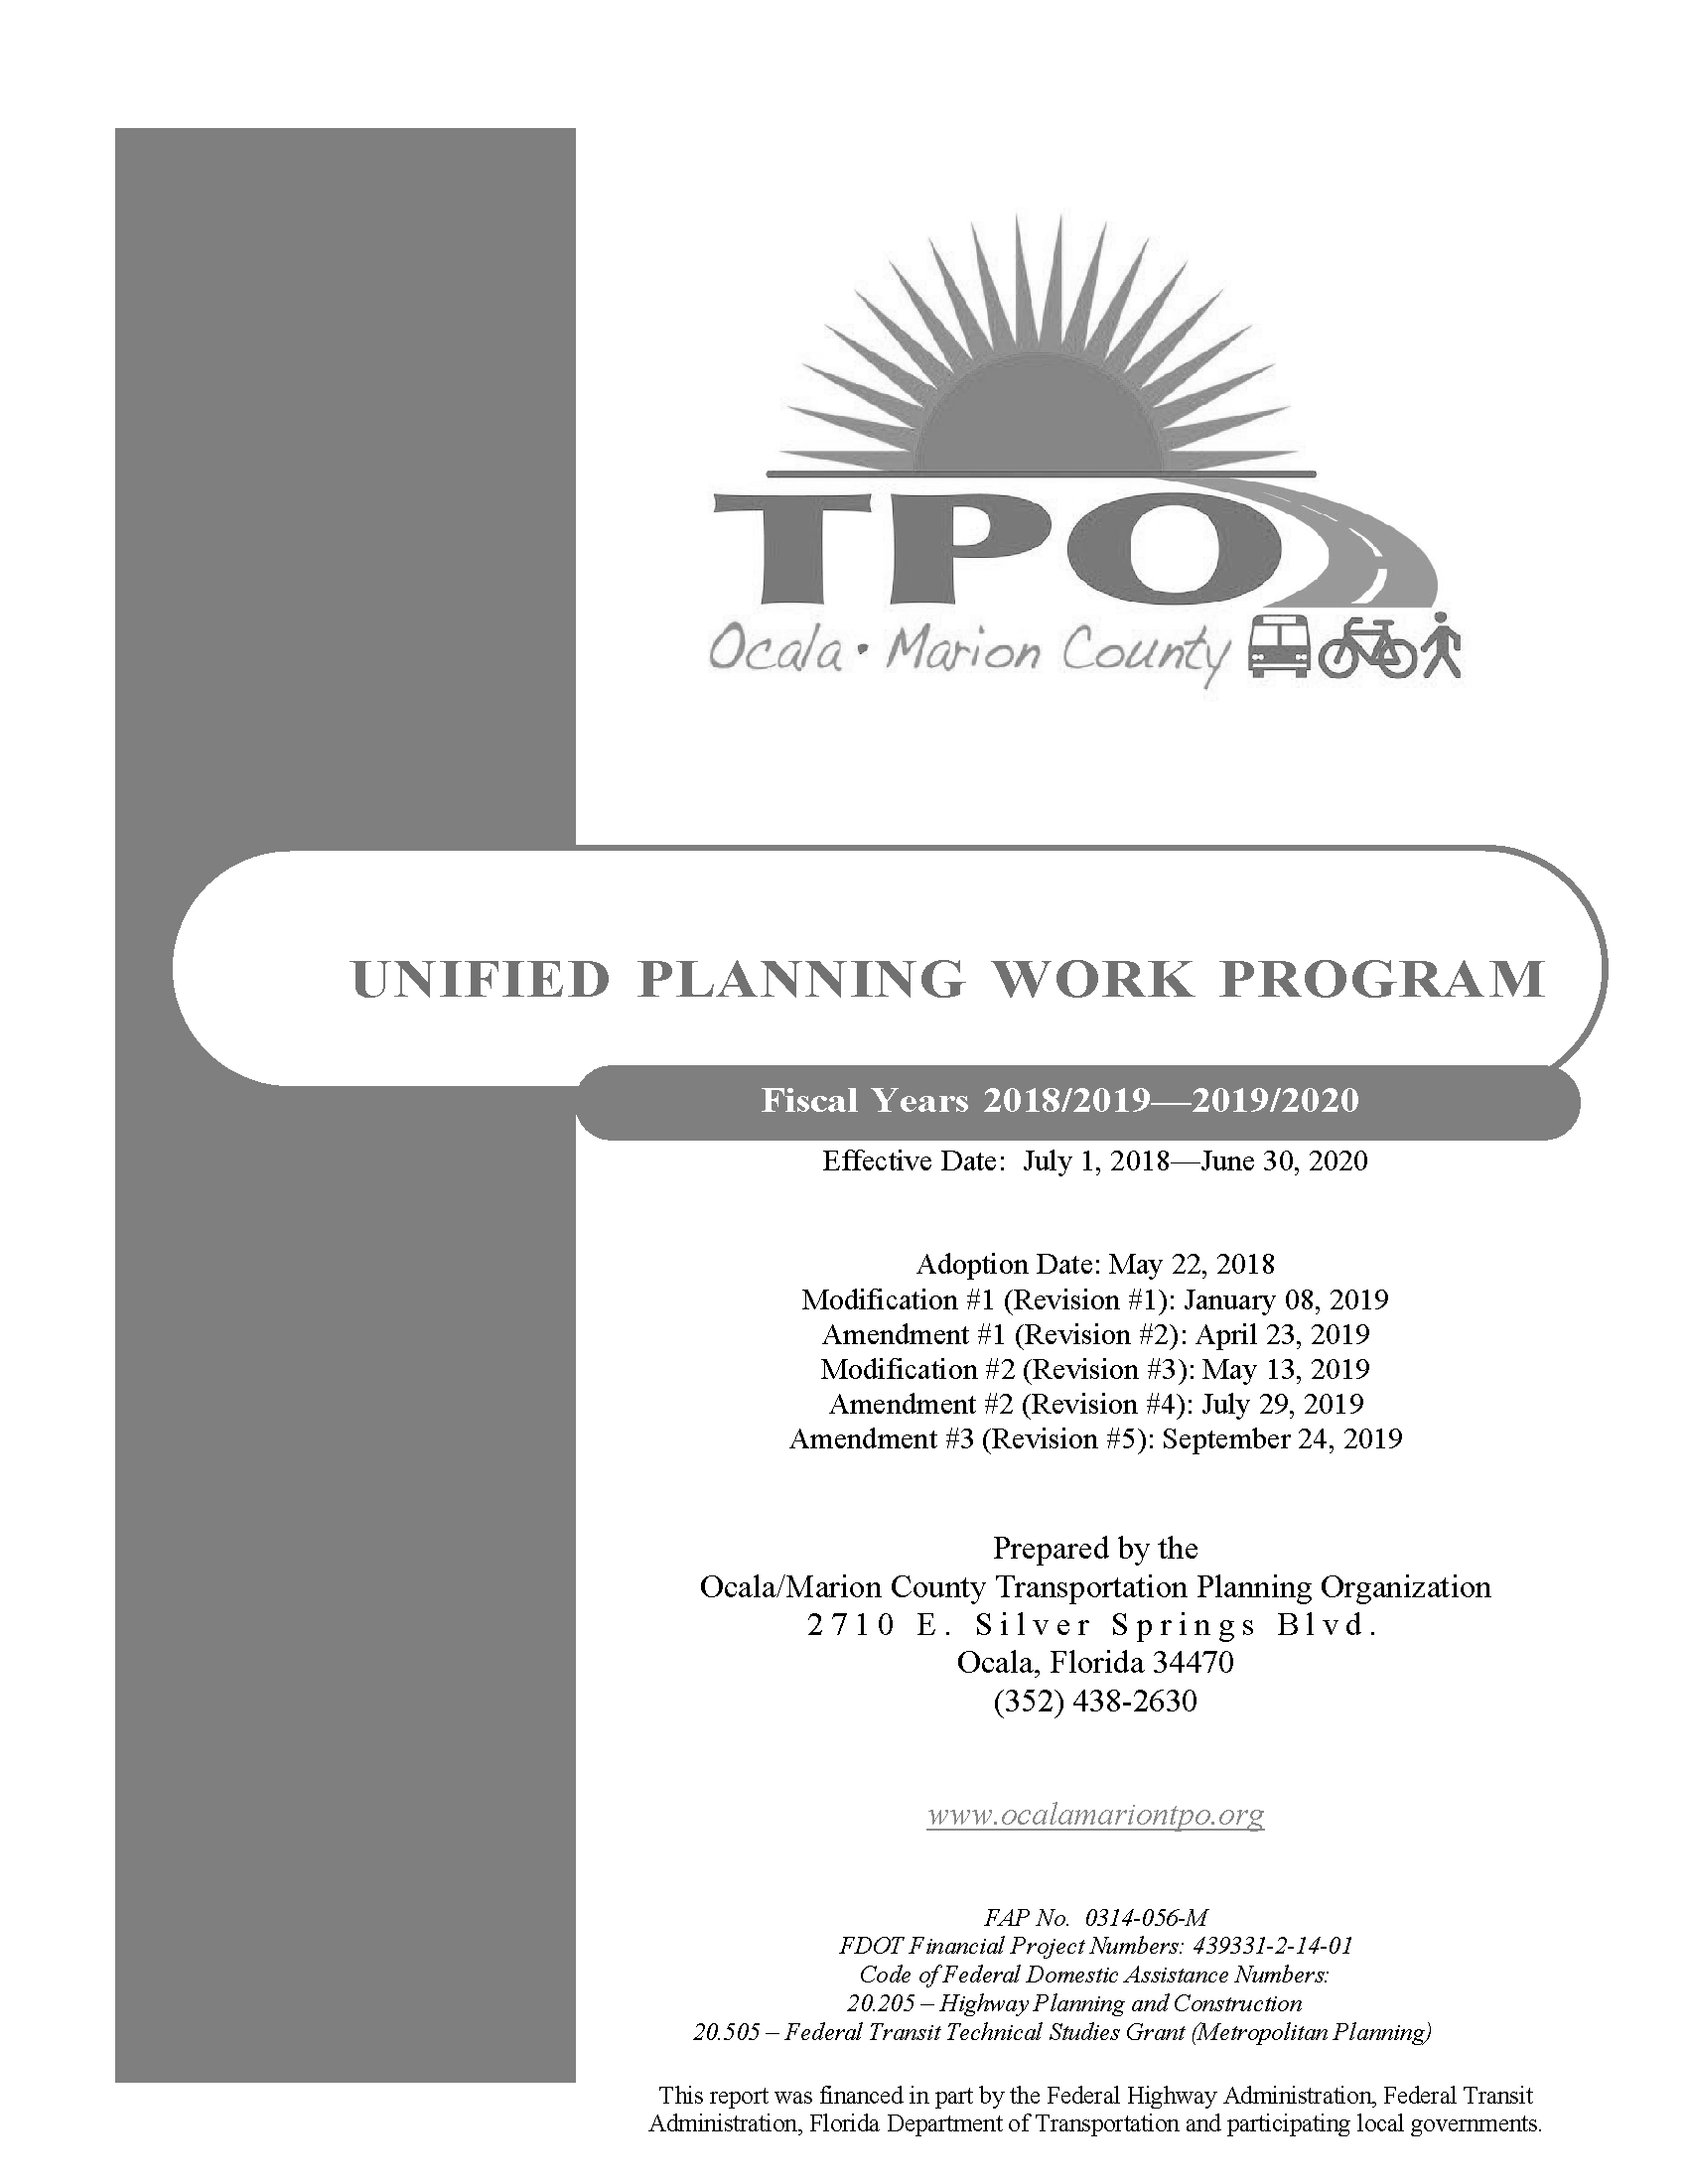 Current Unified Planning Work Program